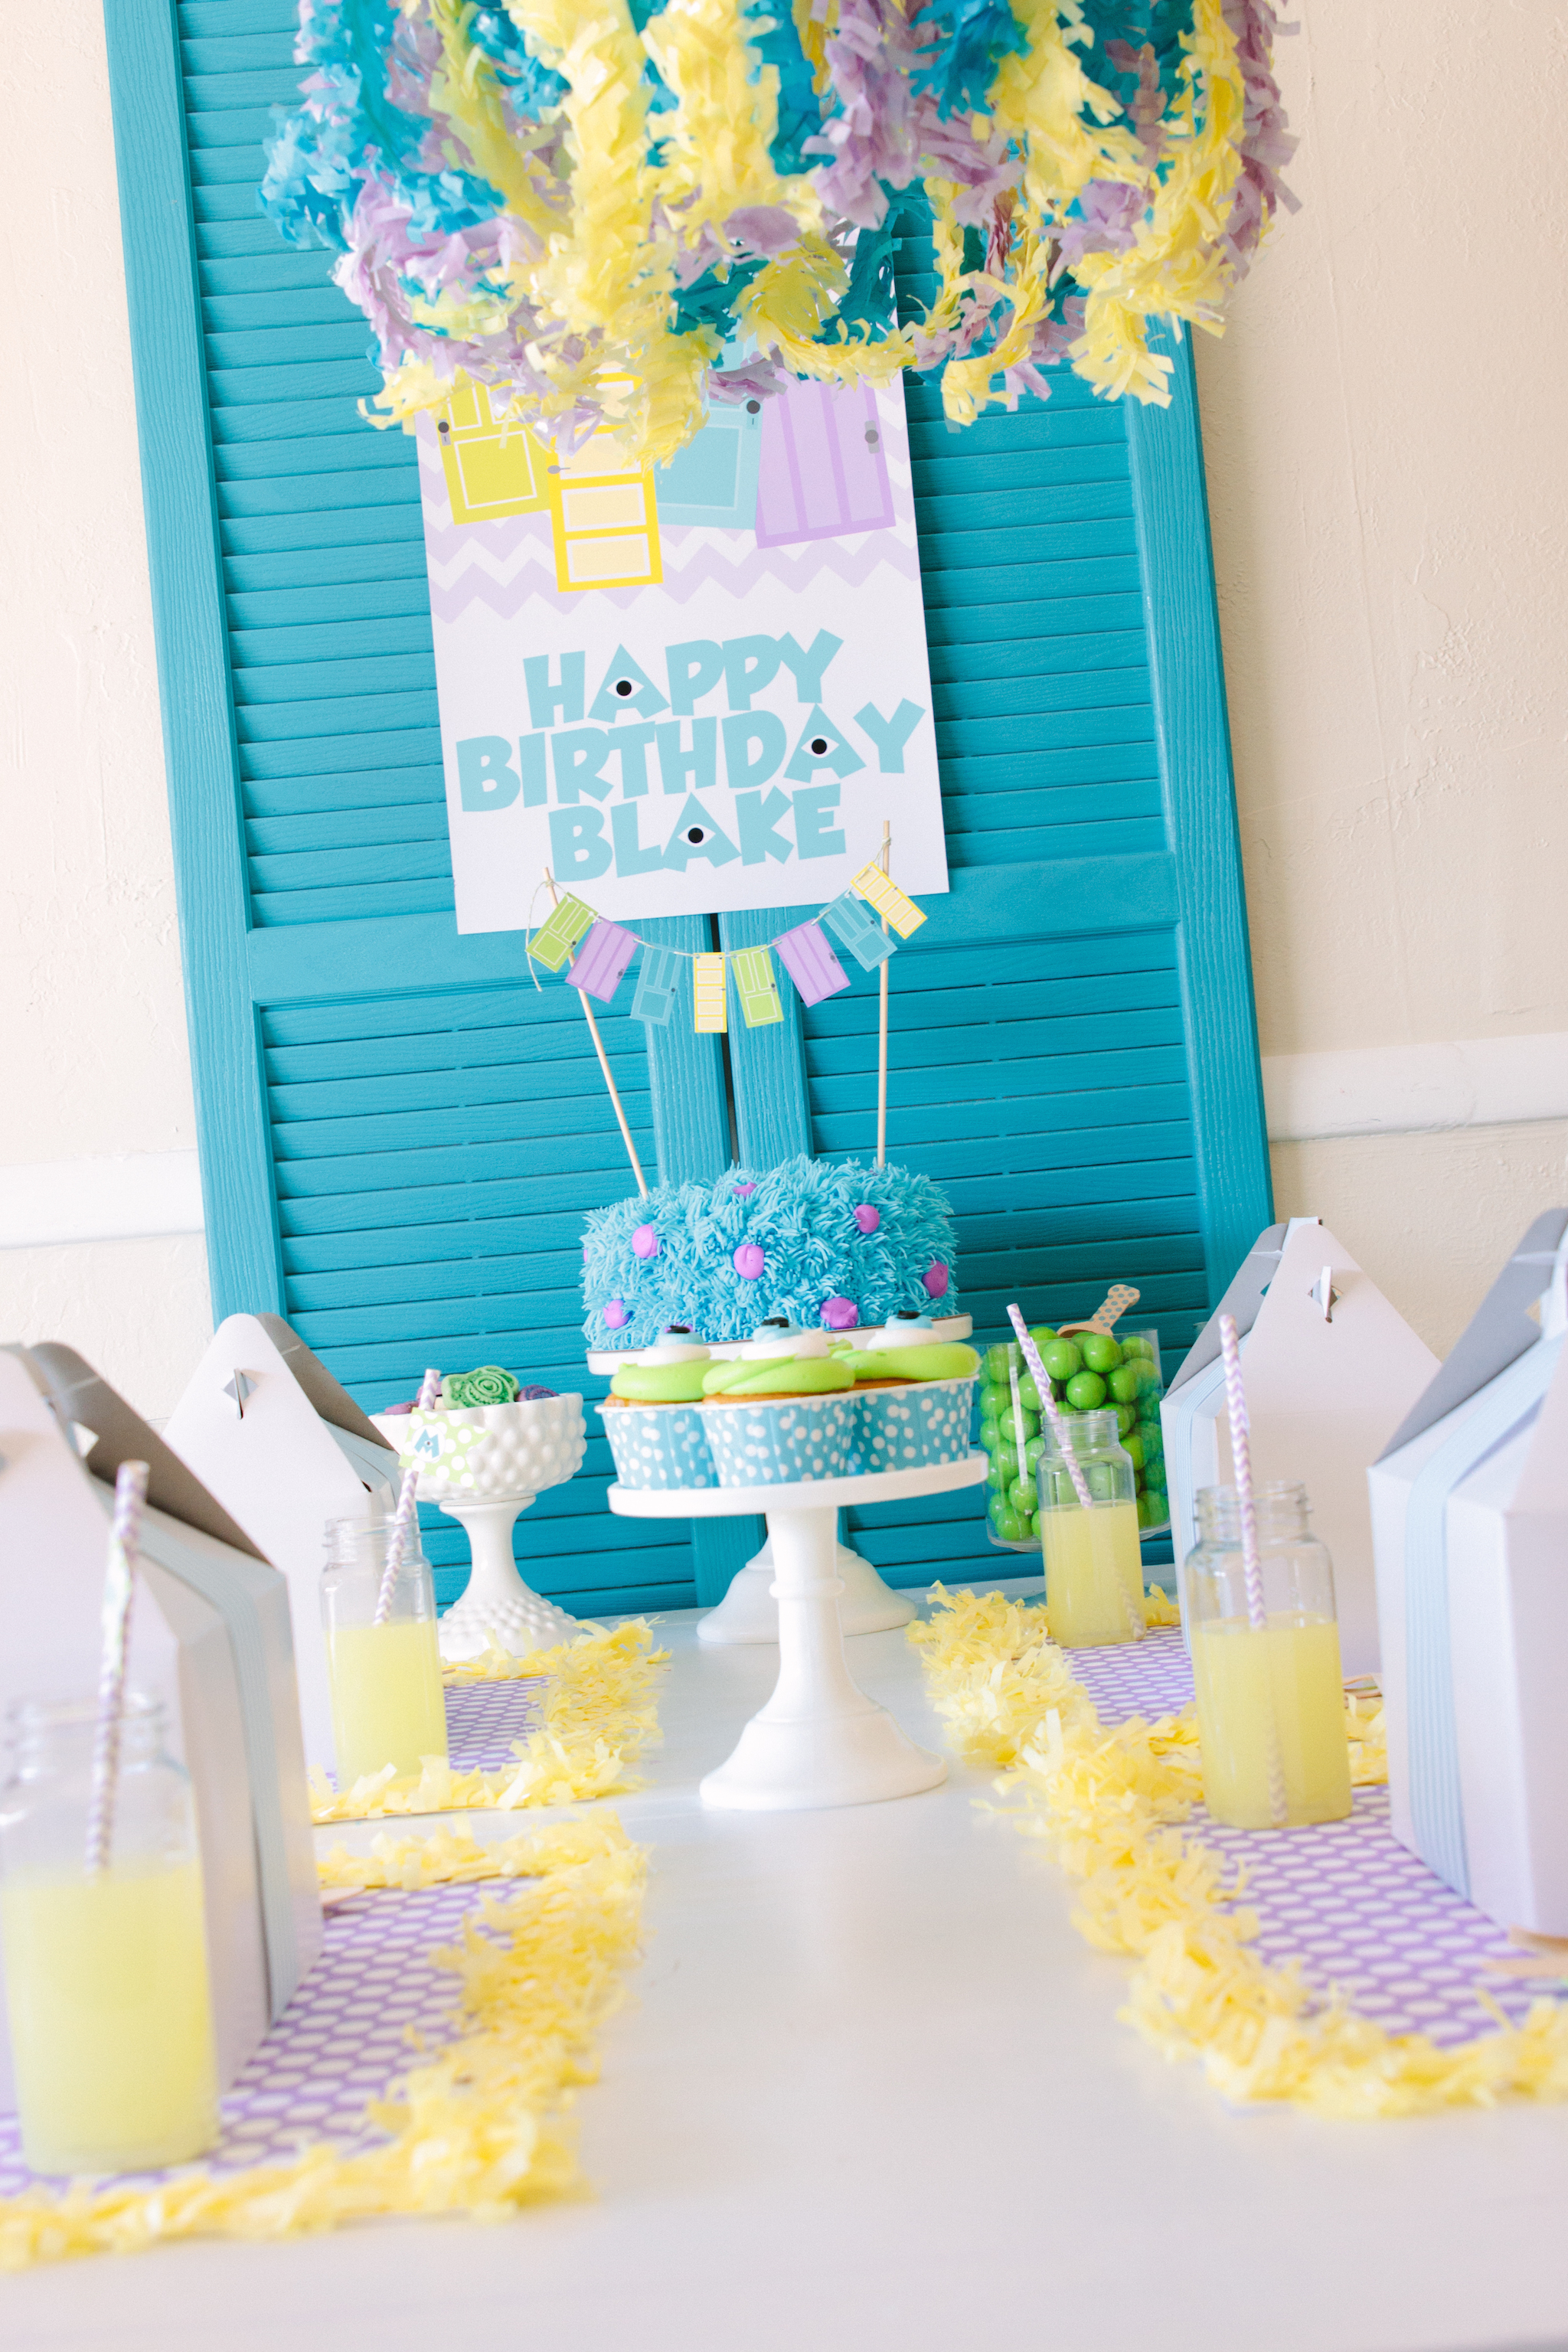 Monsters, Inc. Inspired Birthday Party Decor